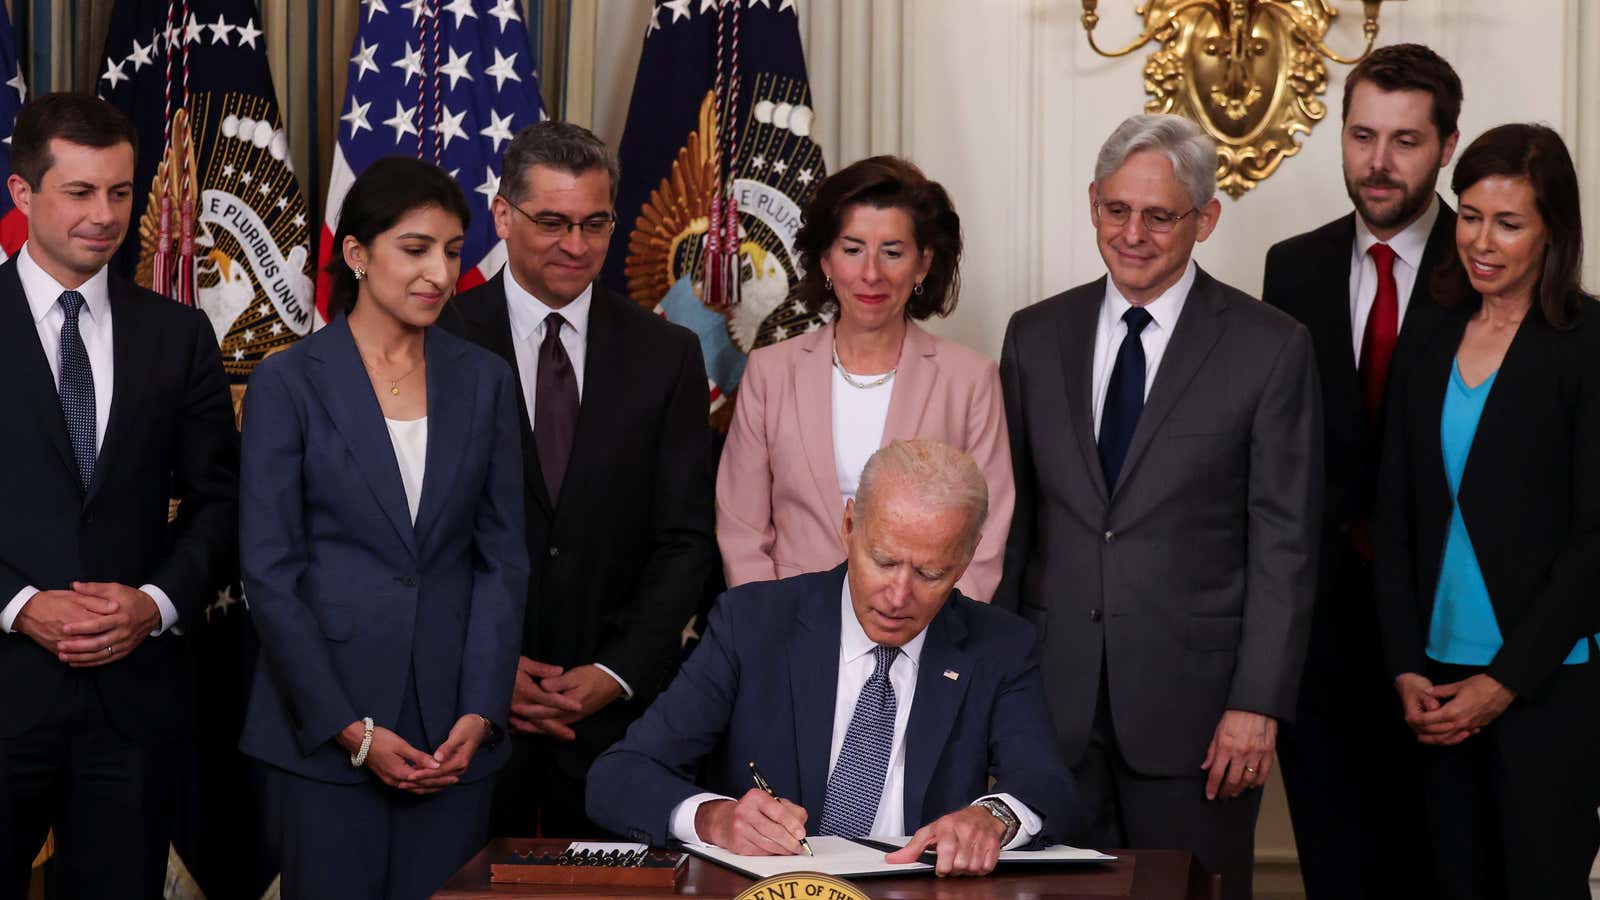 Biden signed an “Executive Order on Promoting Competition in the American Economy” Friday afternoon.